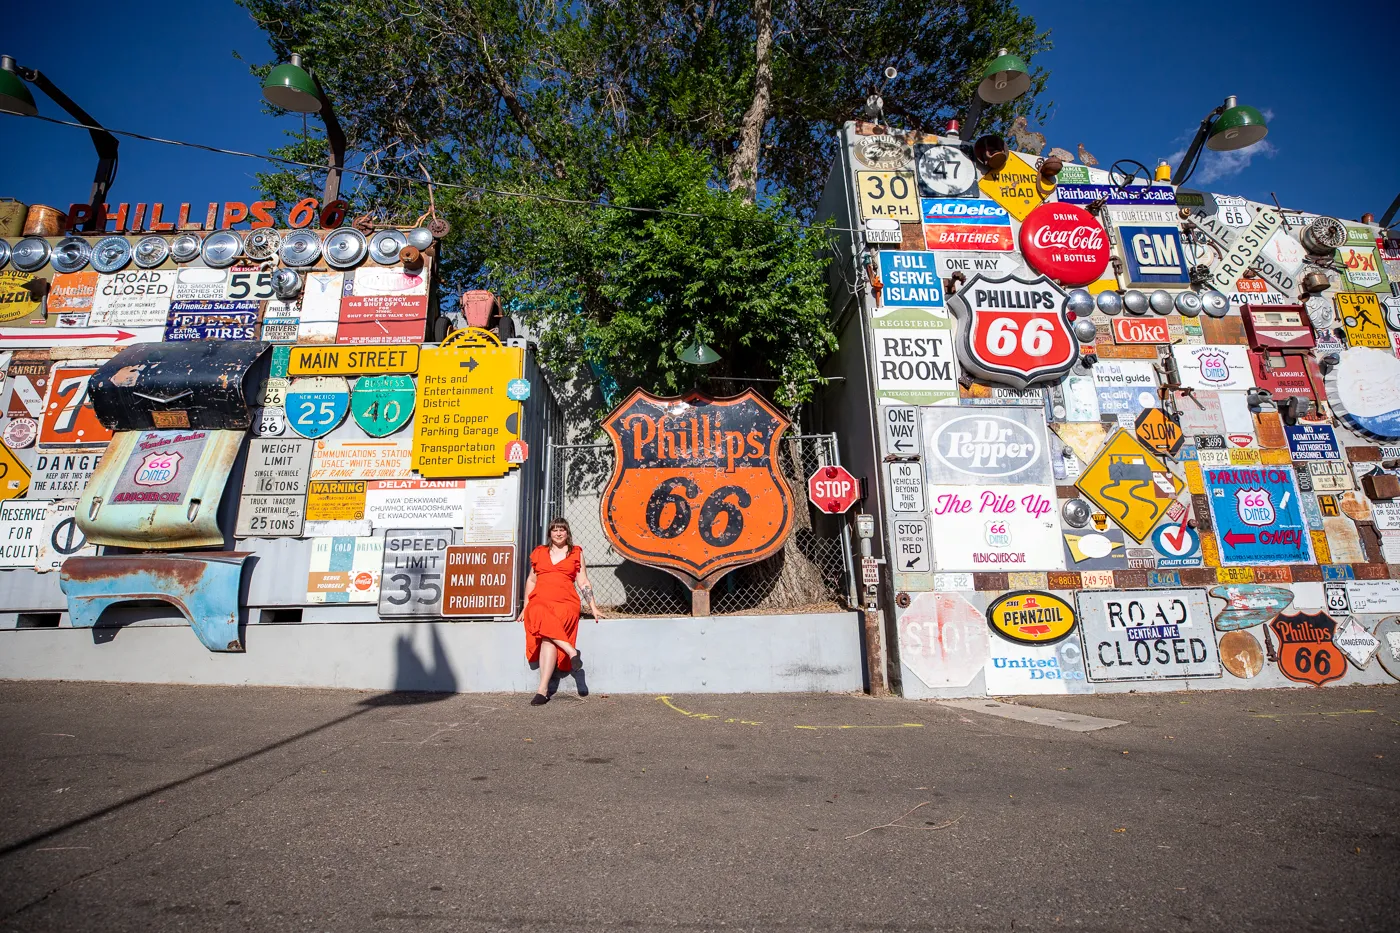 Wall of vintage road signs at 66 Diner in Albuquerque, New Mexico Route 66 roadside attraction